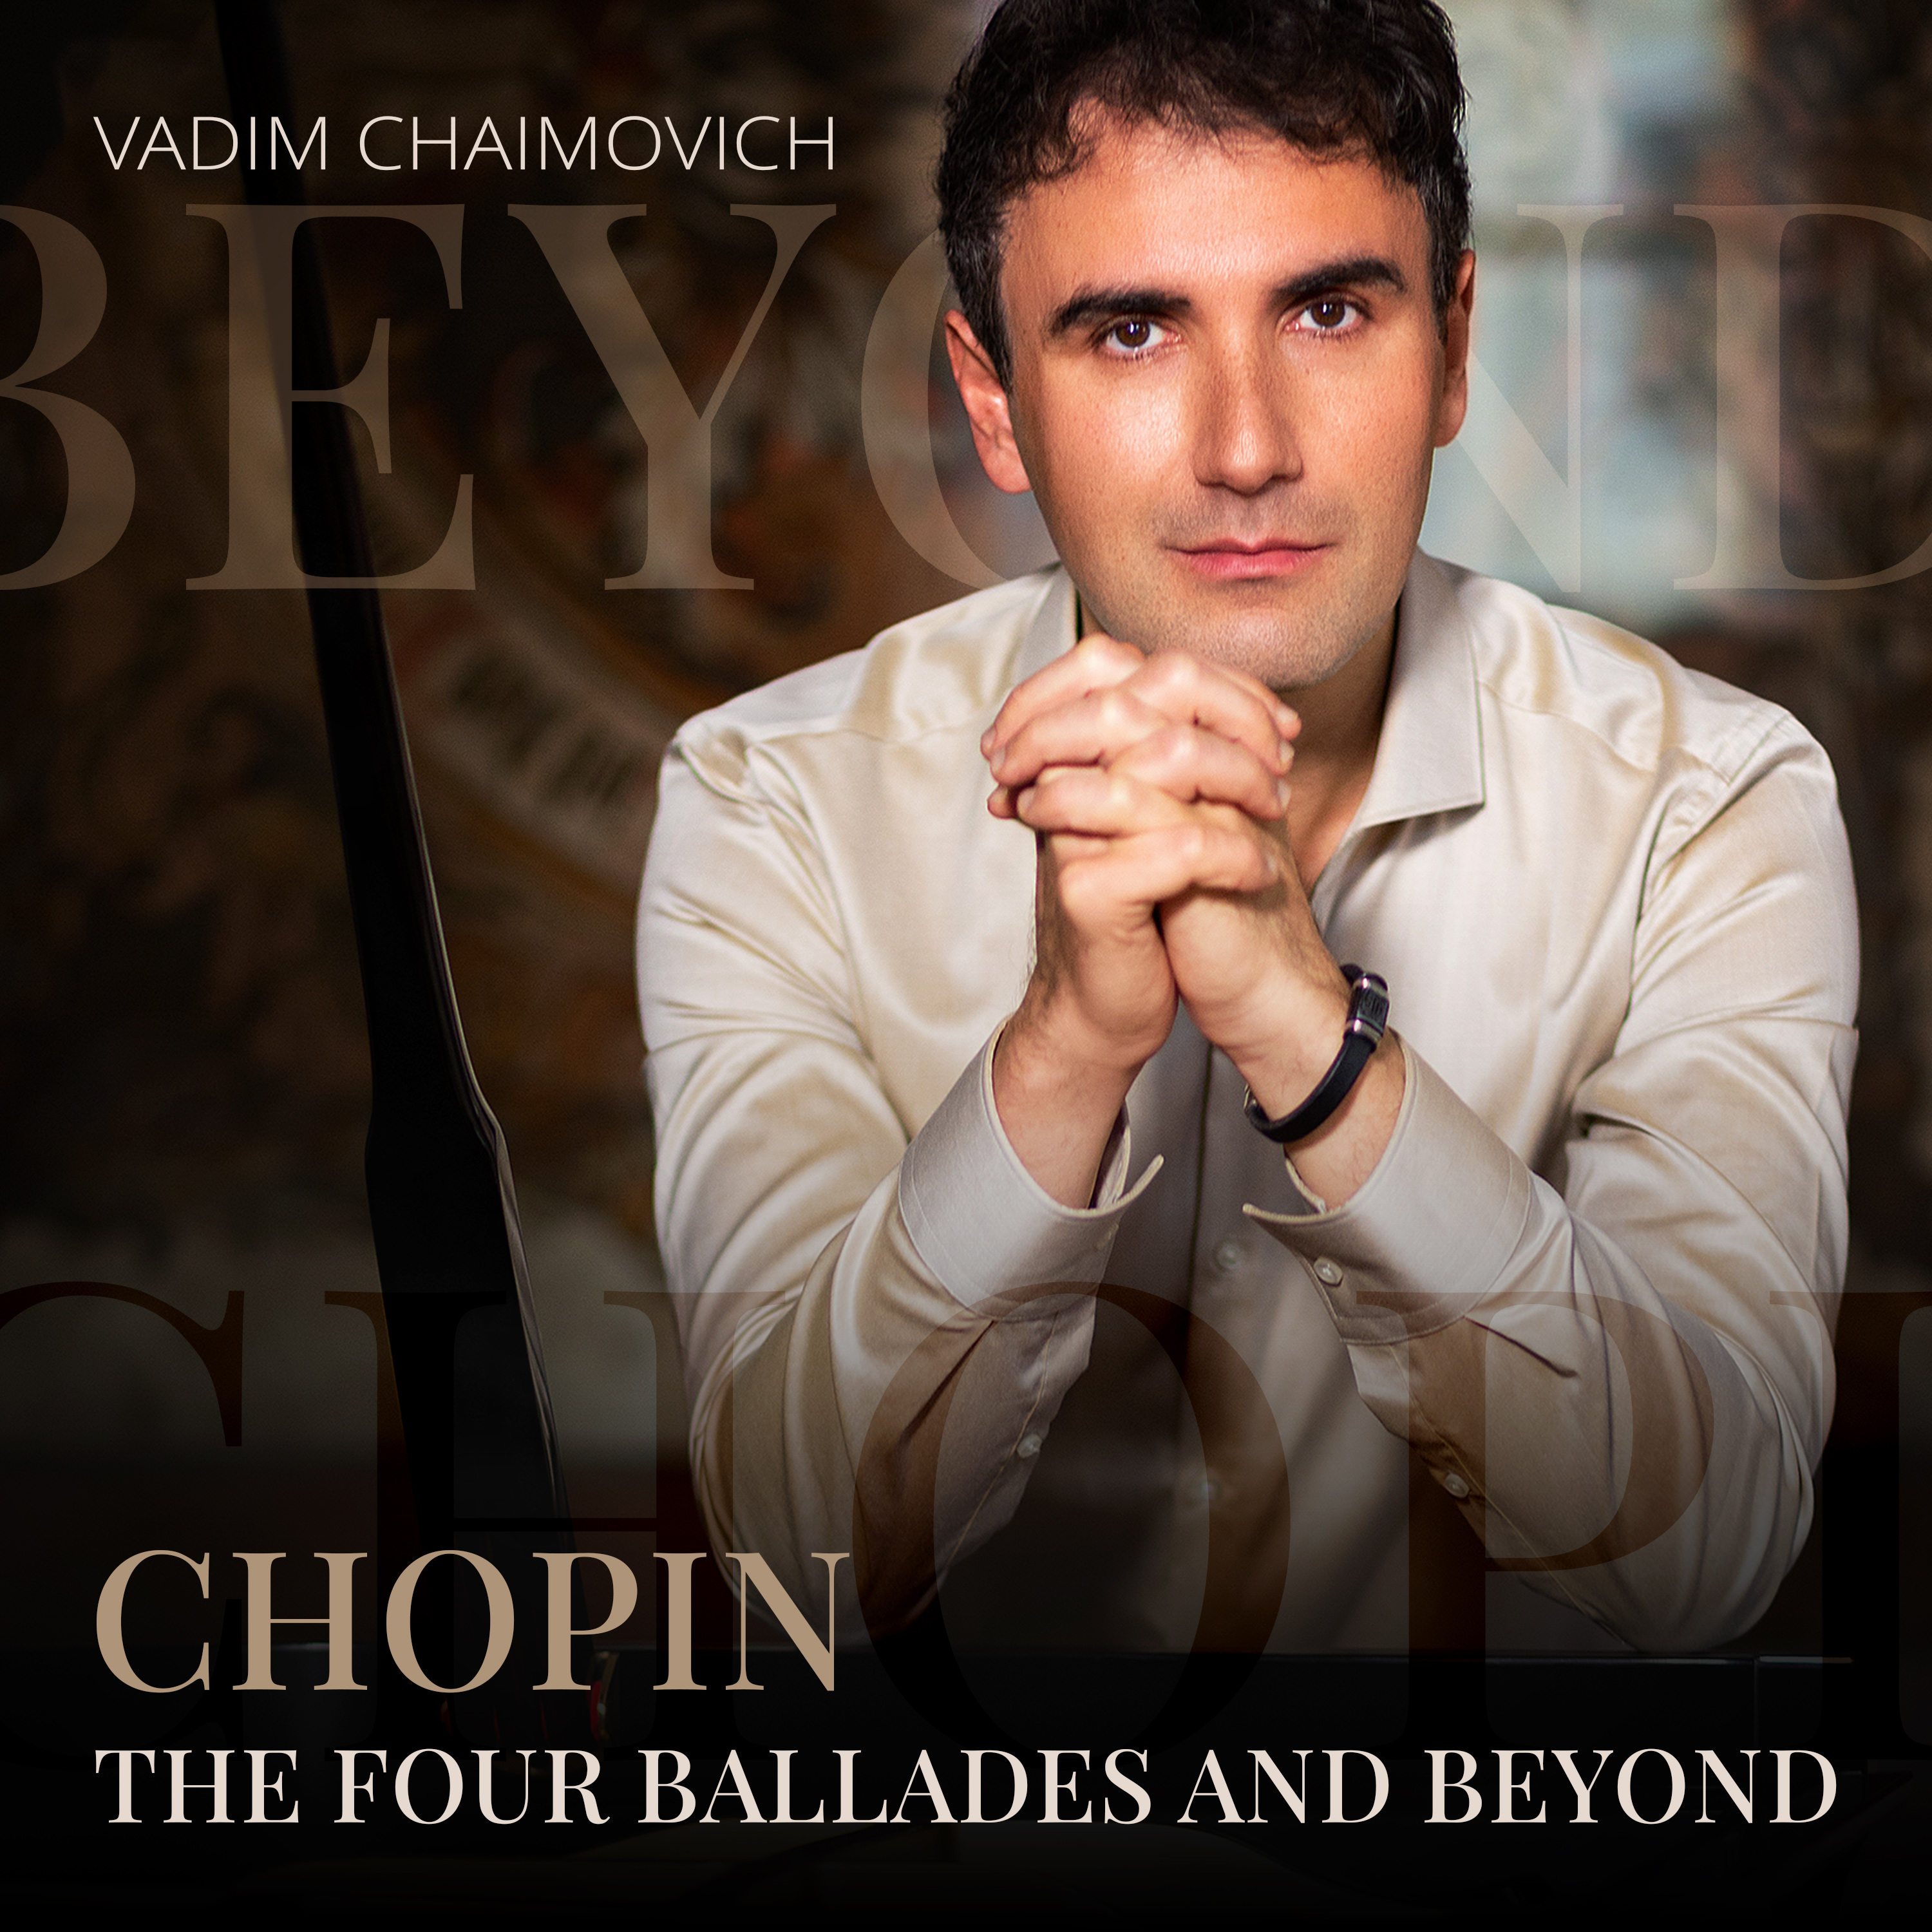 Chopin: The Four Ballades and Beyond